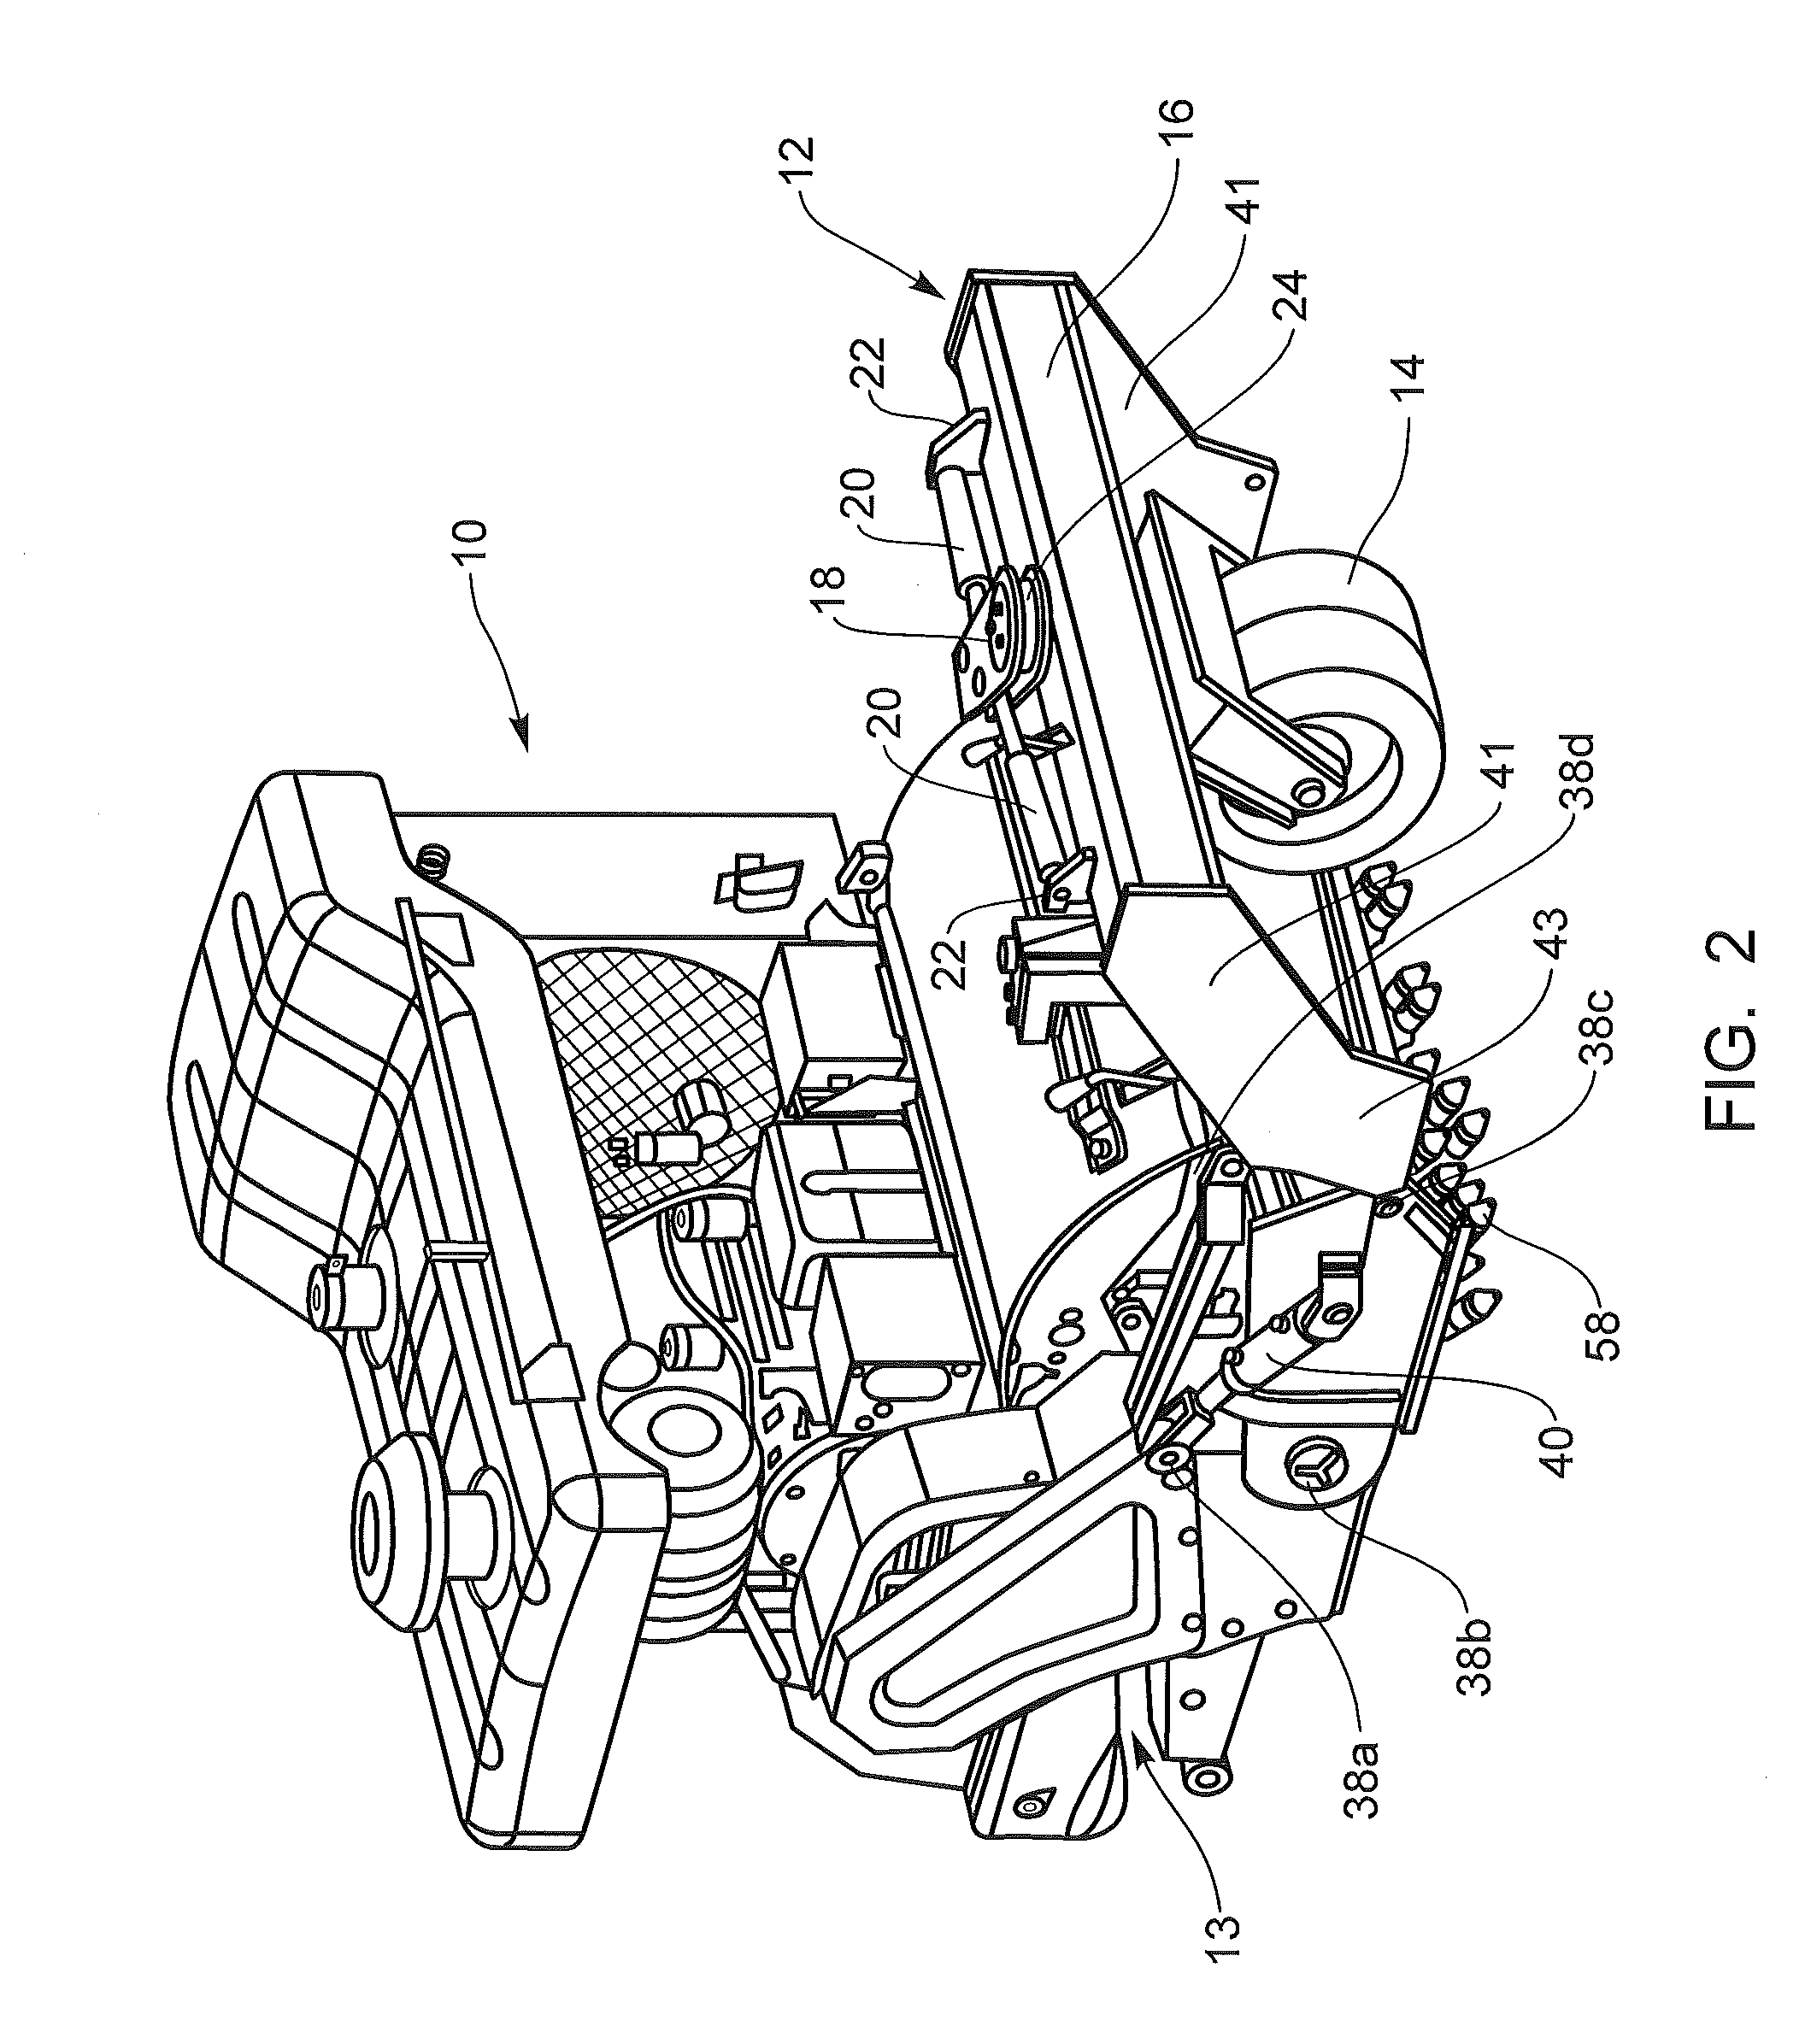 Steerable system for asphalt milling attachment